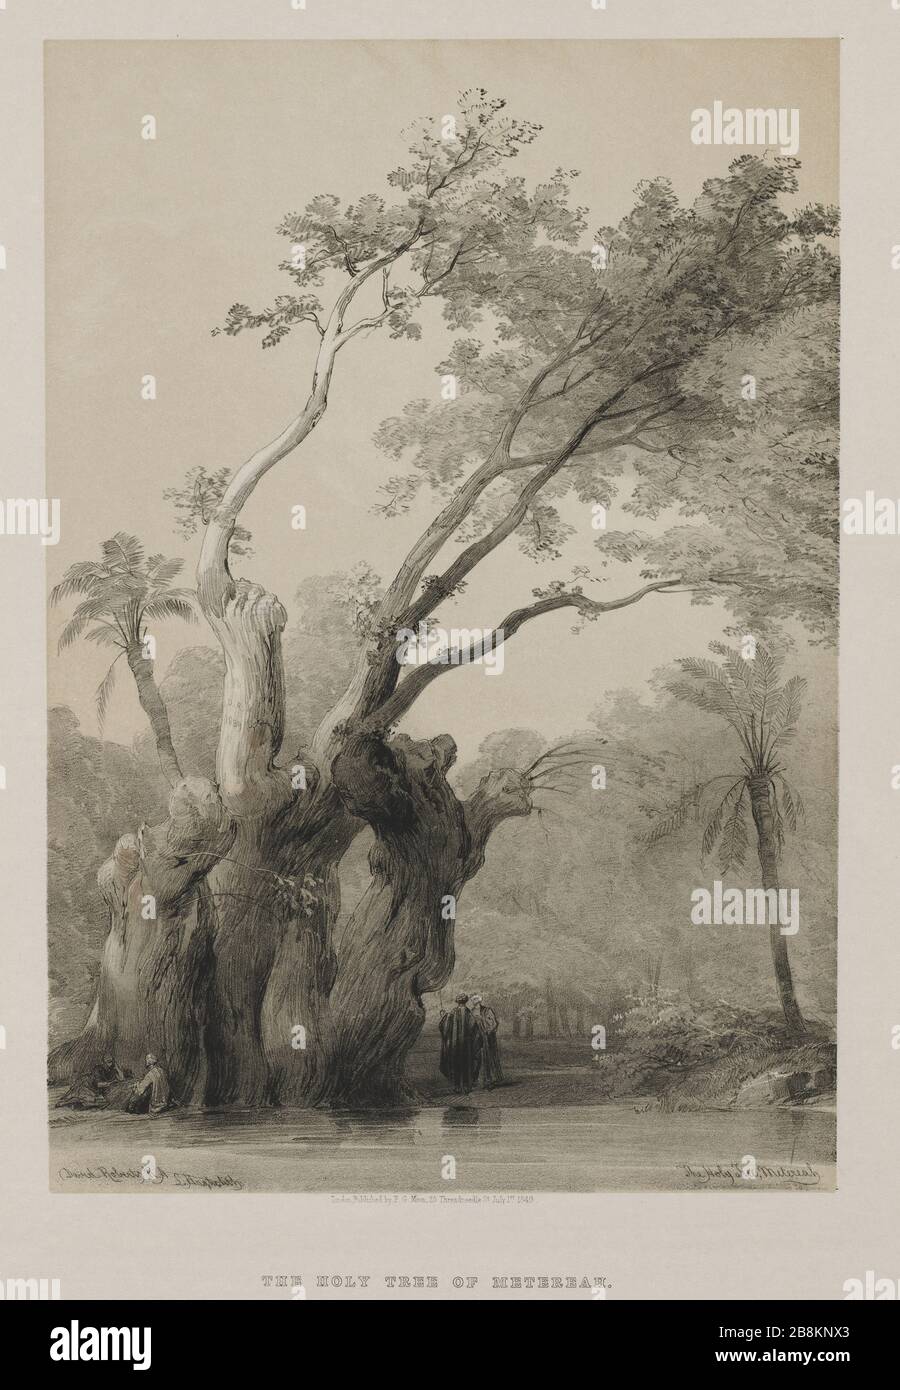 Egypt and Nubia, Volume III: The Holy Tree of Metereah, 1849. Louis Haghe (British, 1806-1885), F.G.Moon, 20 Threadneedle Street, London, after David Roberts (British, 1796-1864). Color lithograph; sheet: 45 x 40.5 cm (17 11/16 x 15 15/16 in.); image: 35.1 x 23.9 cm (13 13/16 x 9 7/16 in.). The Cleveland Museum of Art, Bequest of John Bonebrake 2012.153 Stock Photo